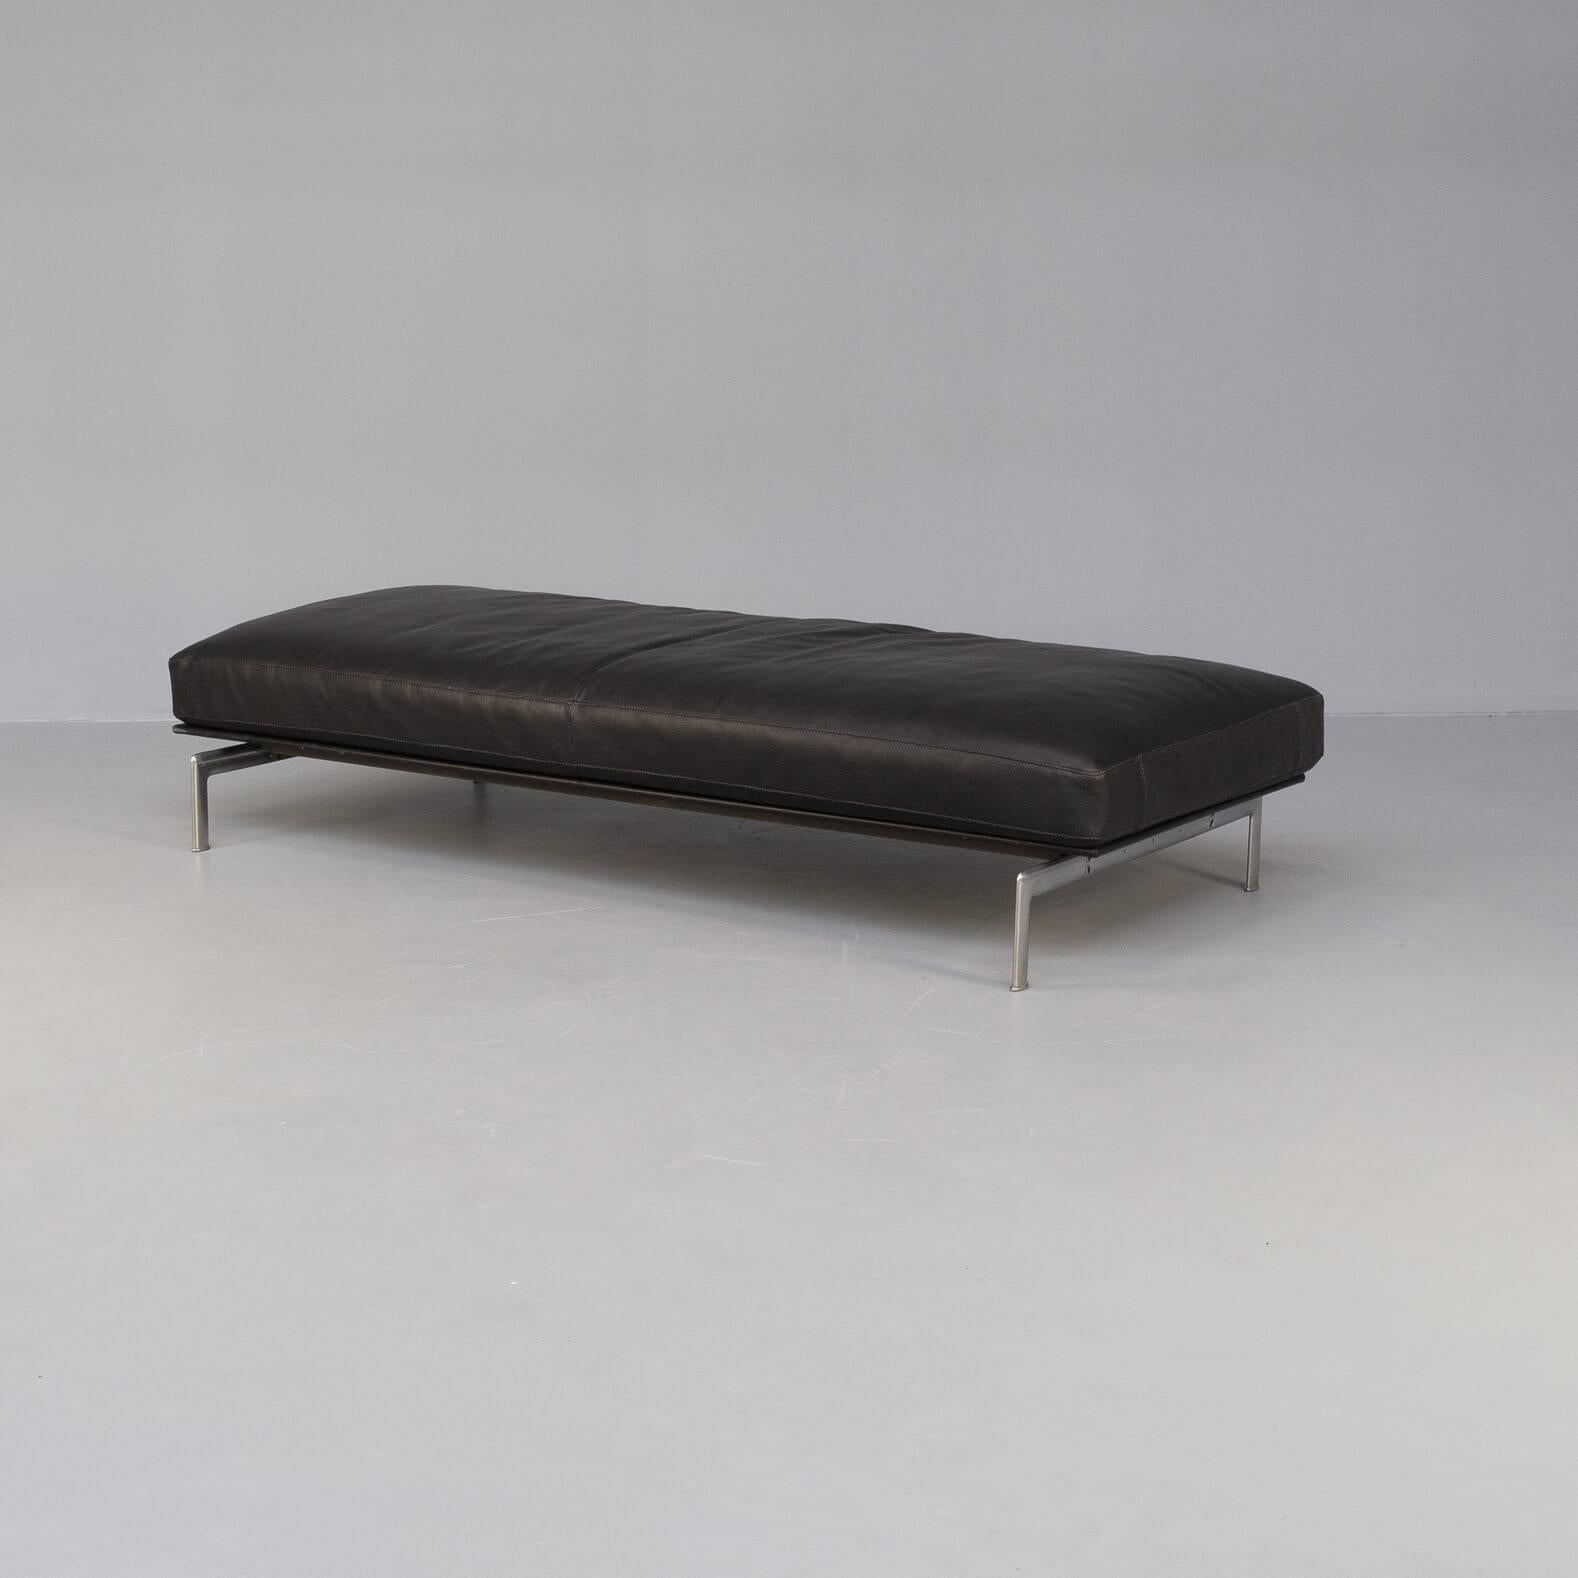 Italian 80s Antonio Citterio and Paolo Nava Black Leather “Diesis” Daybed for B&B Italia For Sale